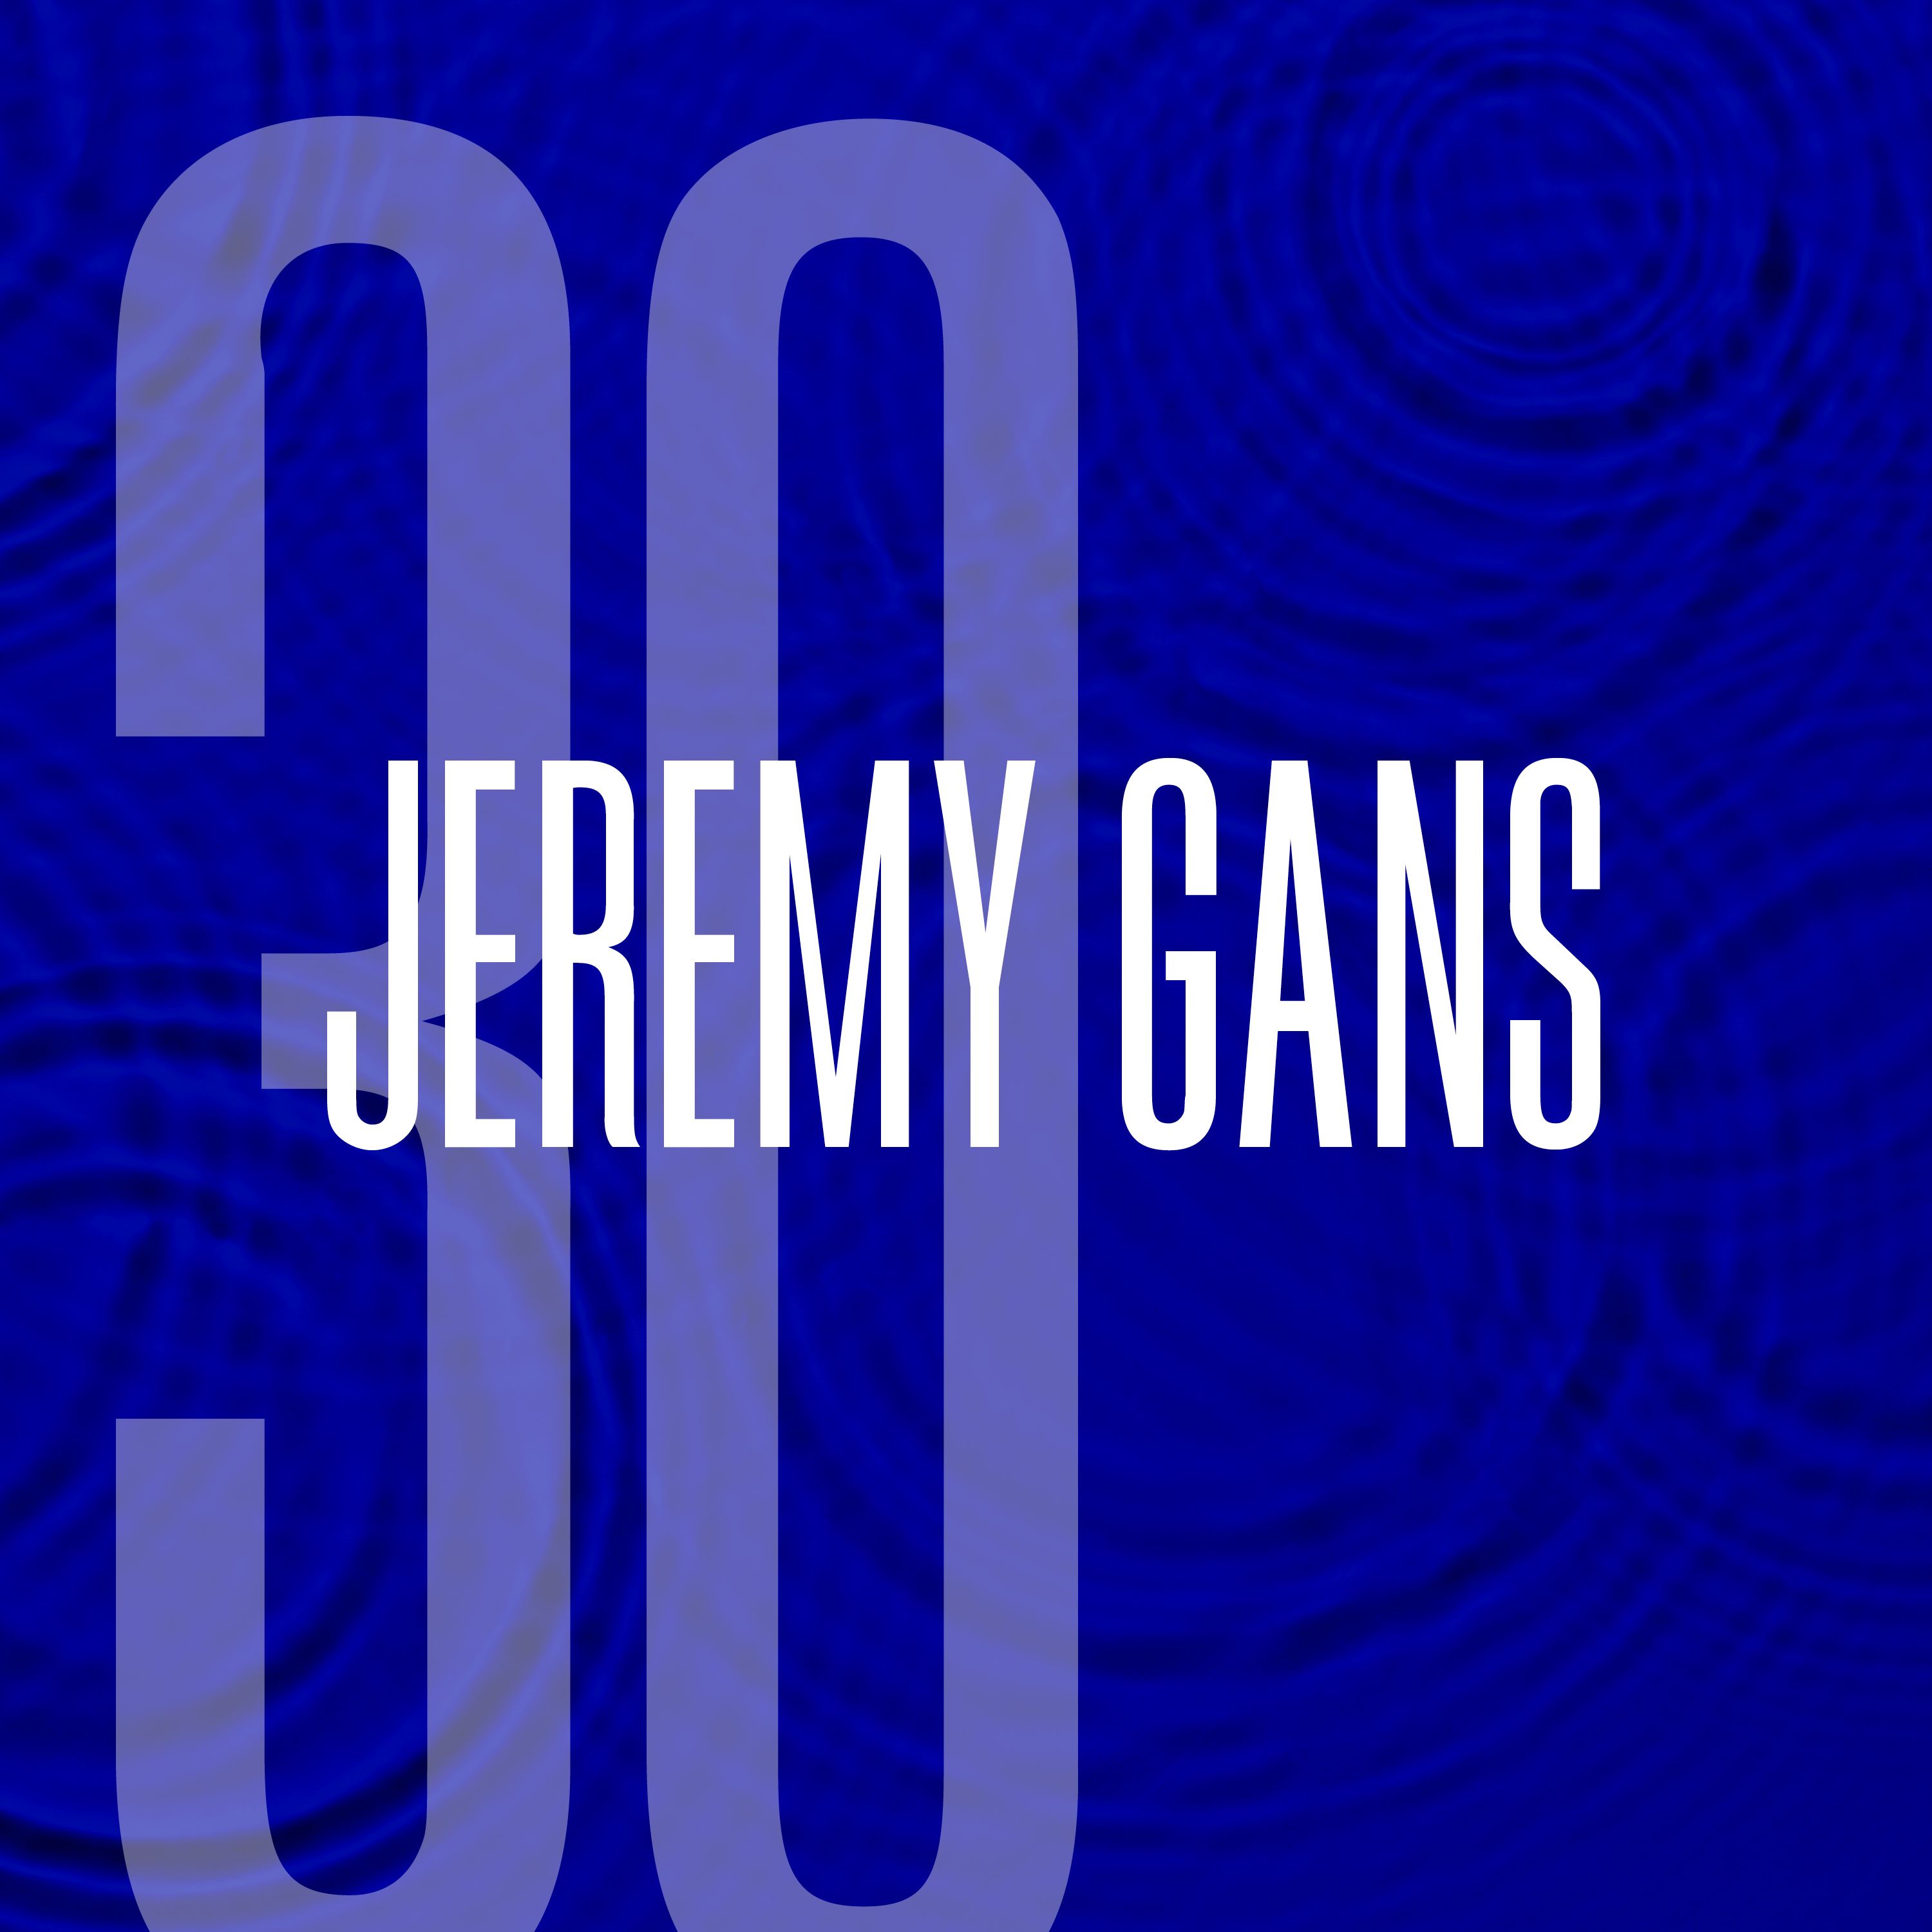 30: Jeremy Gans: Guilty Pigs and Ouija Board Jurors